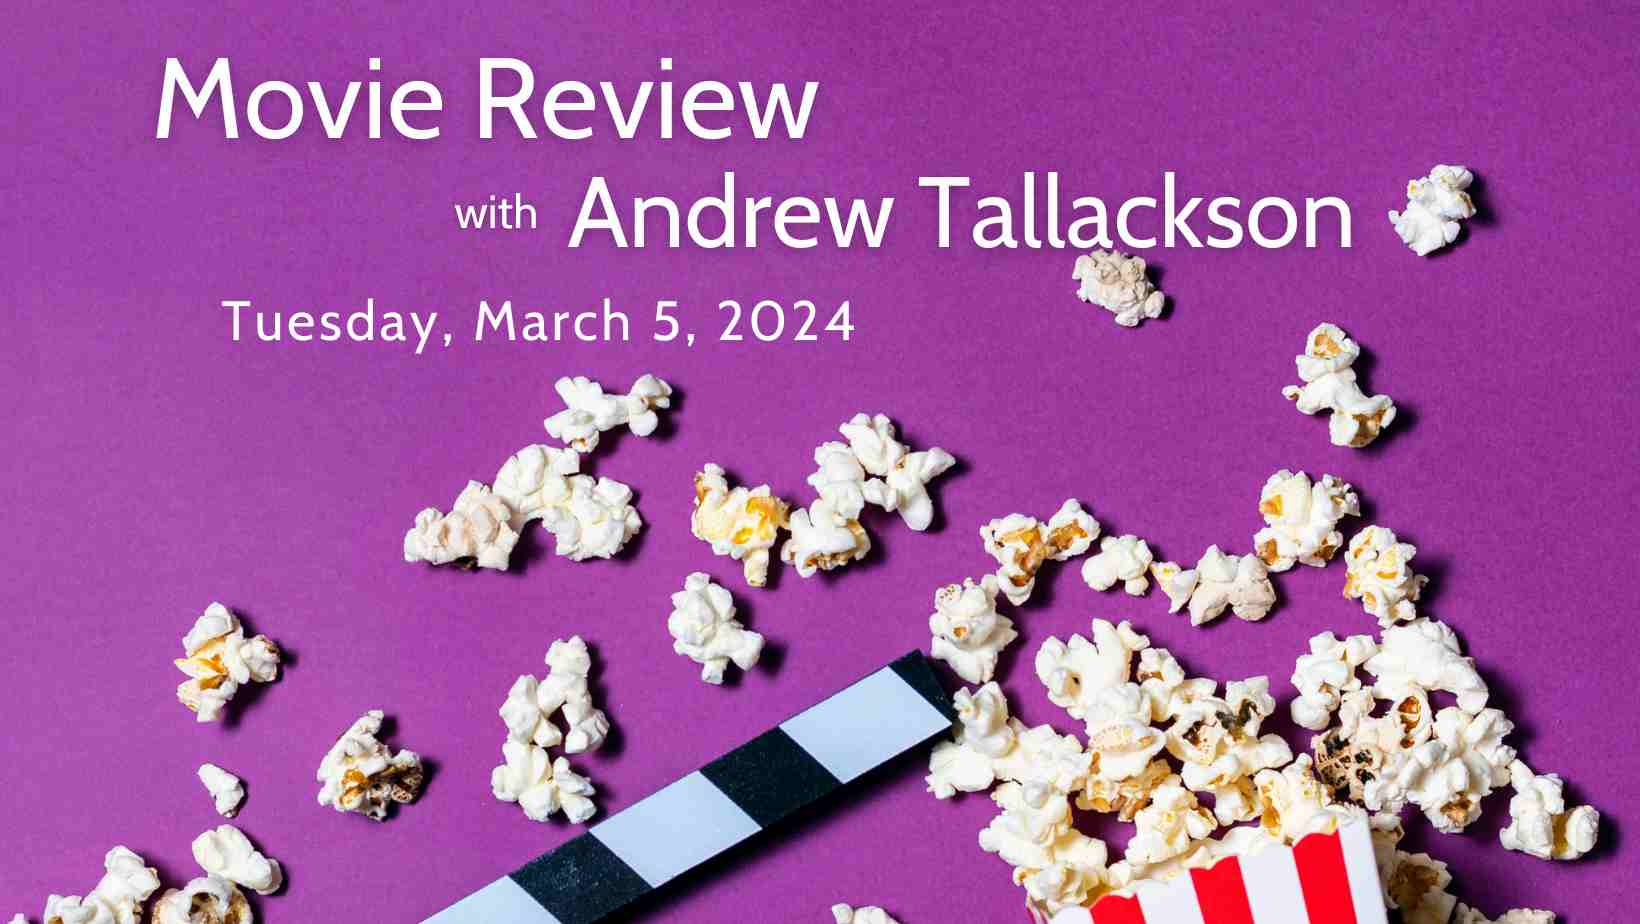 Movie Review with Andrew Tallackson